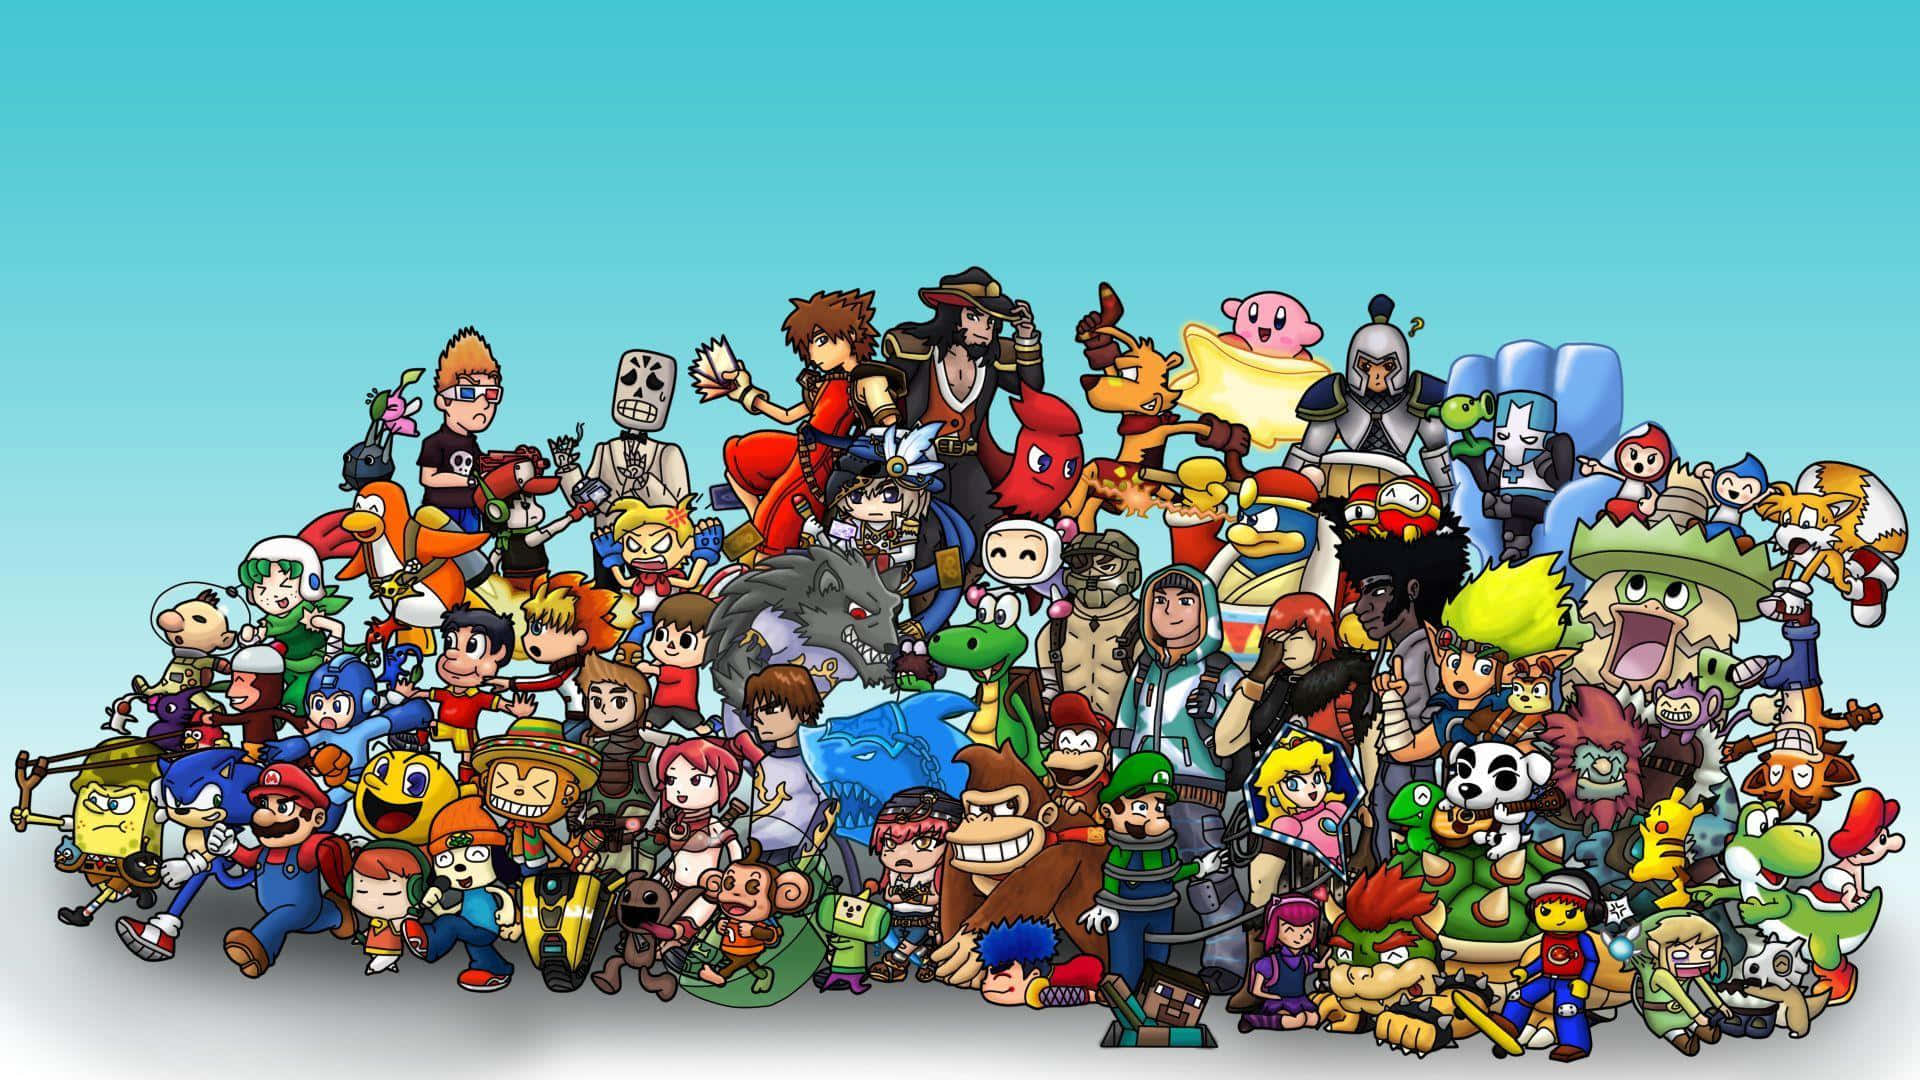 Exciting Cartoon Game Characters in Action Wallpaper